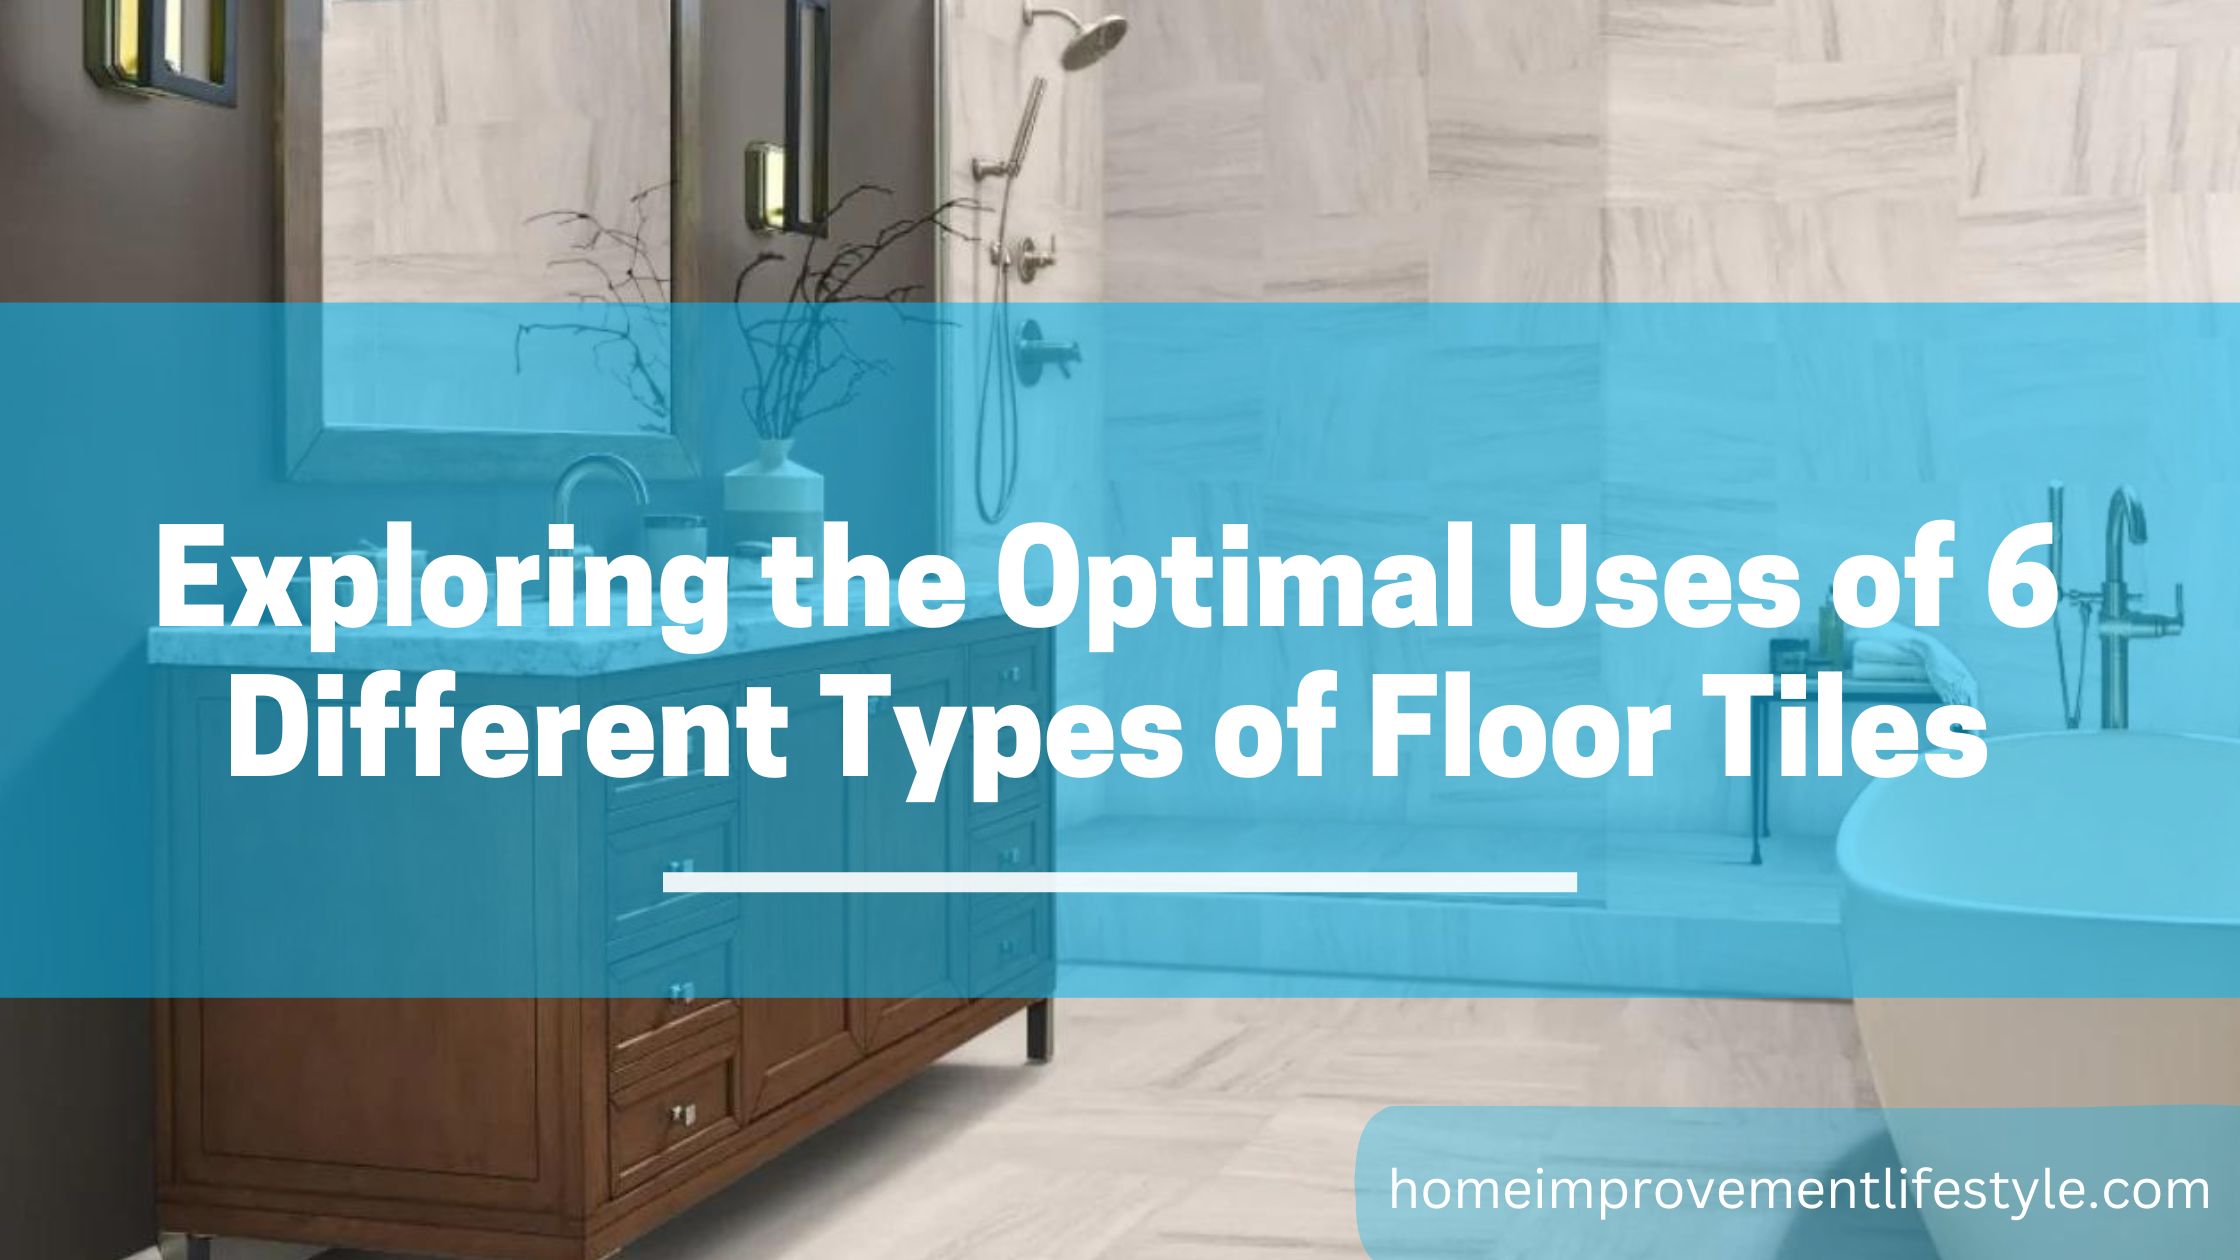 Exploring the Optimal Uses of 6 Different Types of Floor Tiles